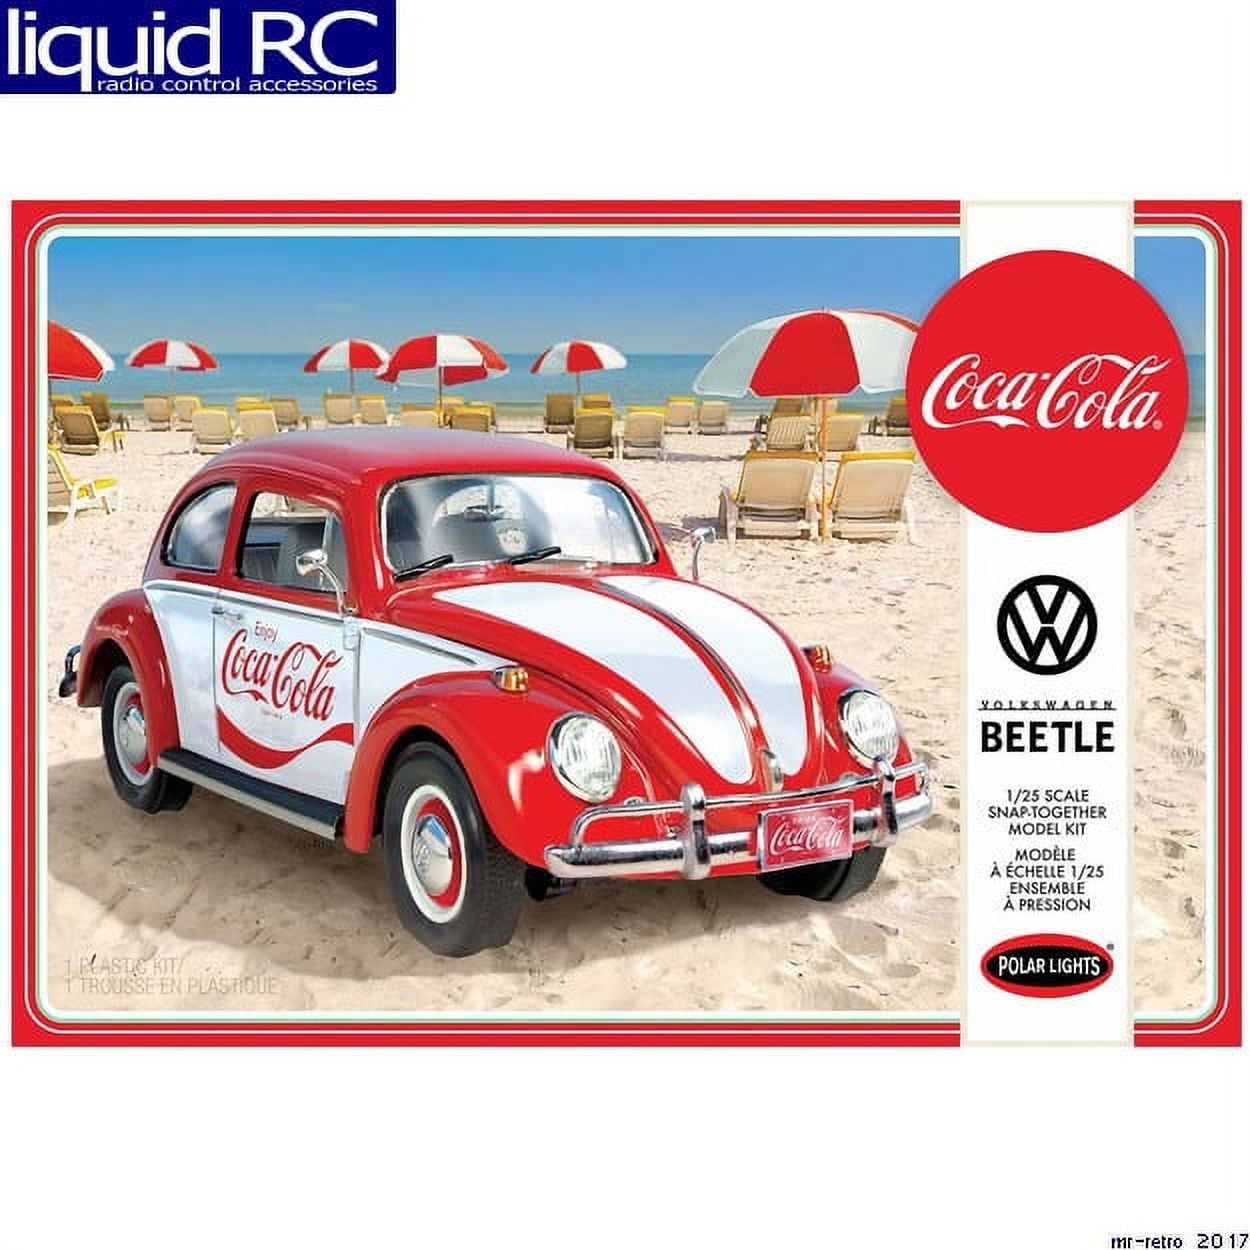 Picture of Polar Light POL960M Series 1-25 Scale Model for Skill 3 Snap Model Kit Volkswagen Beetle Coca-Cola